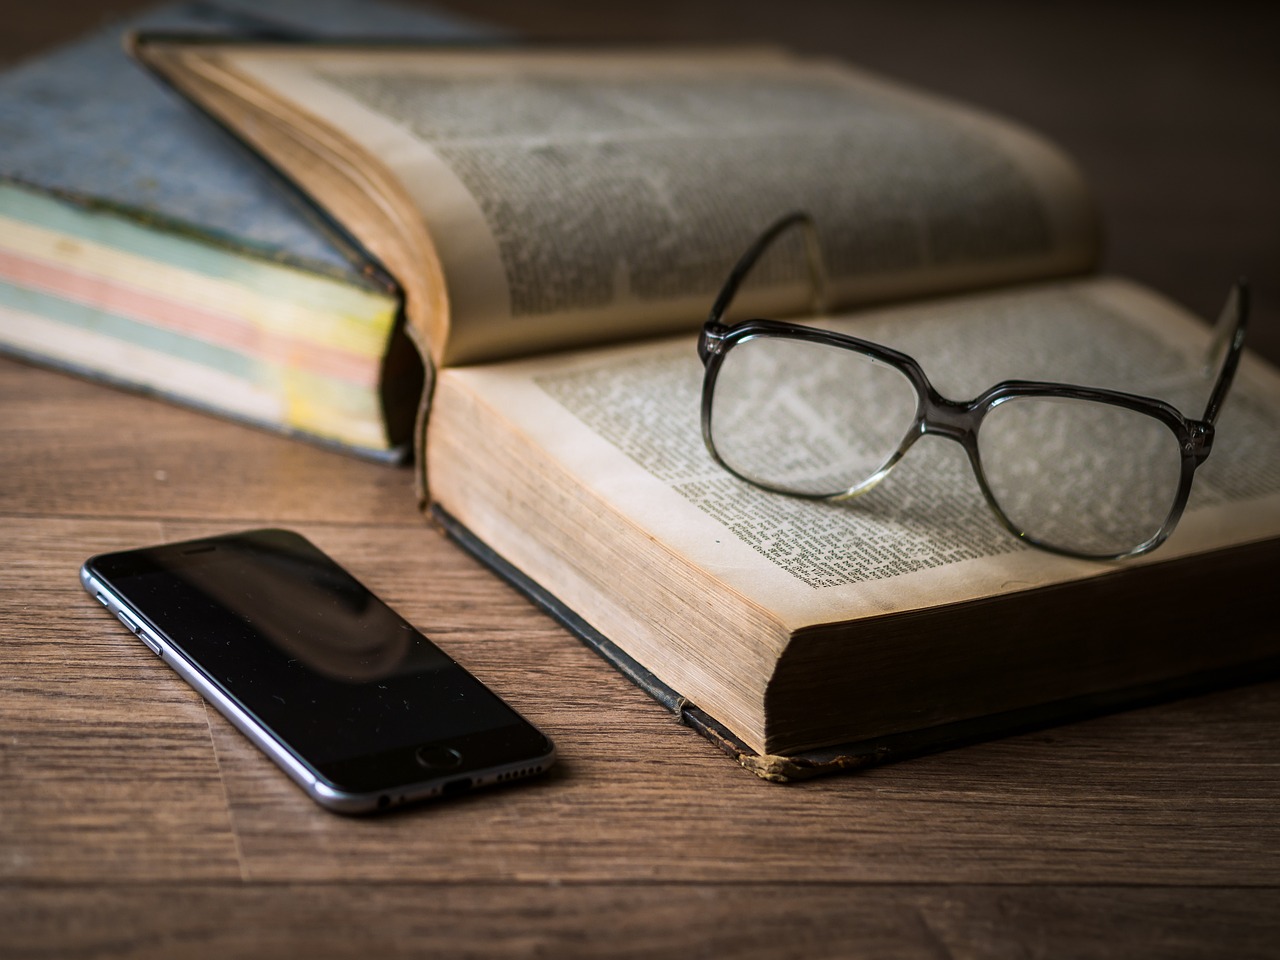 reading glasses on a book, beside a cell phone on a table